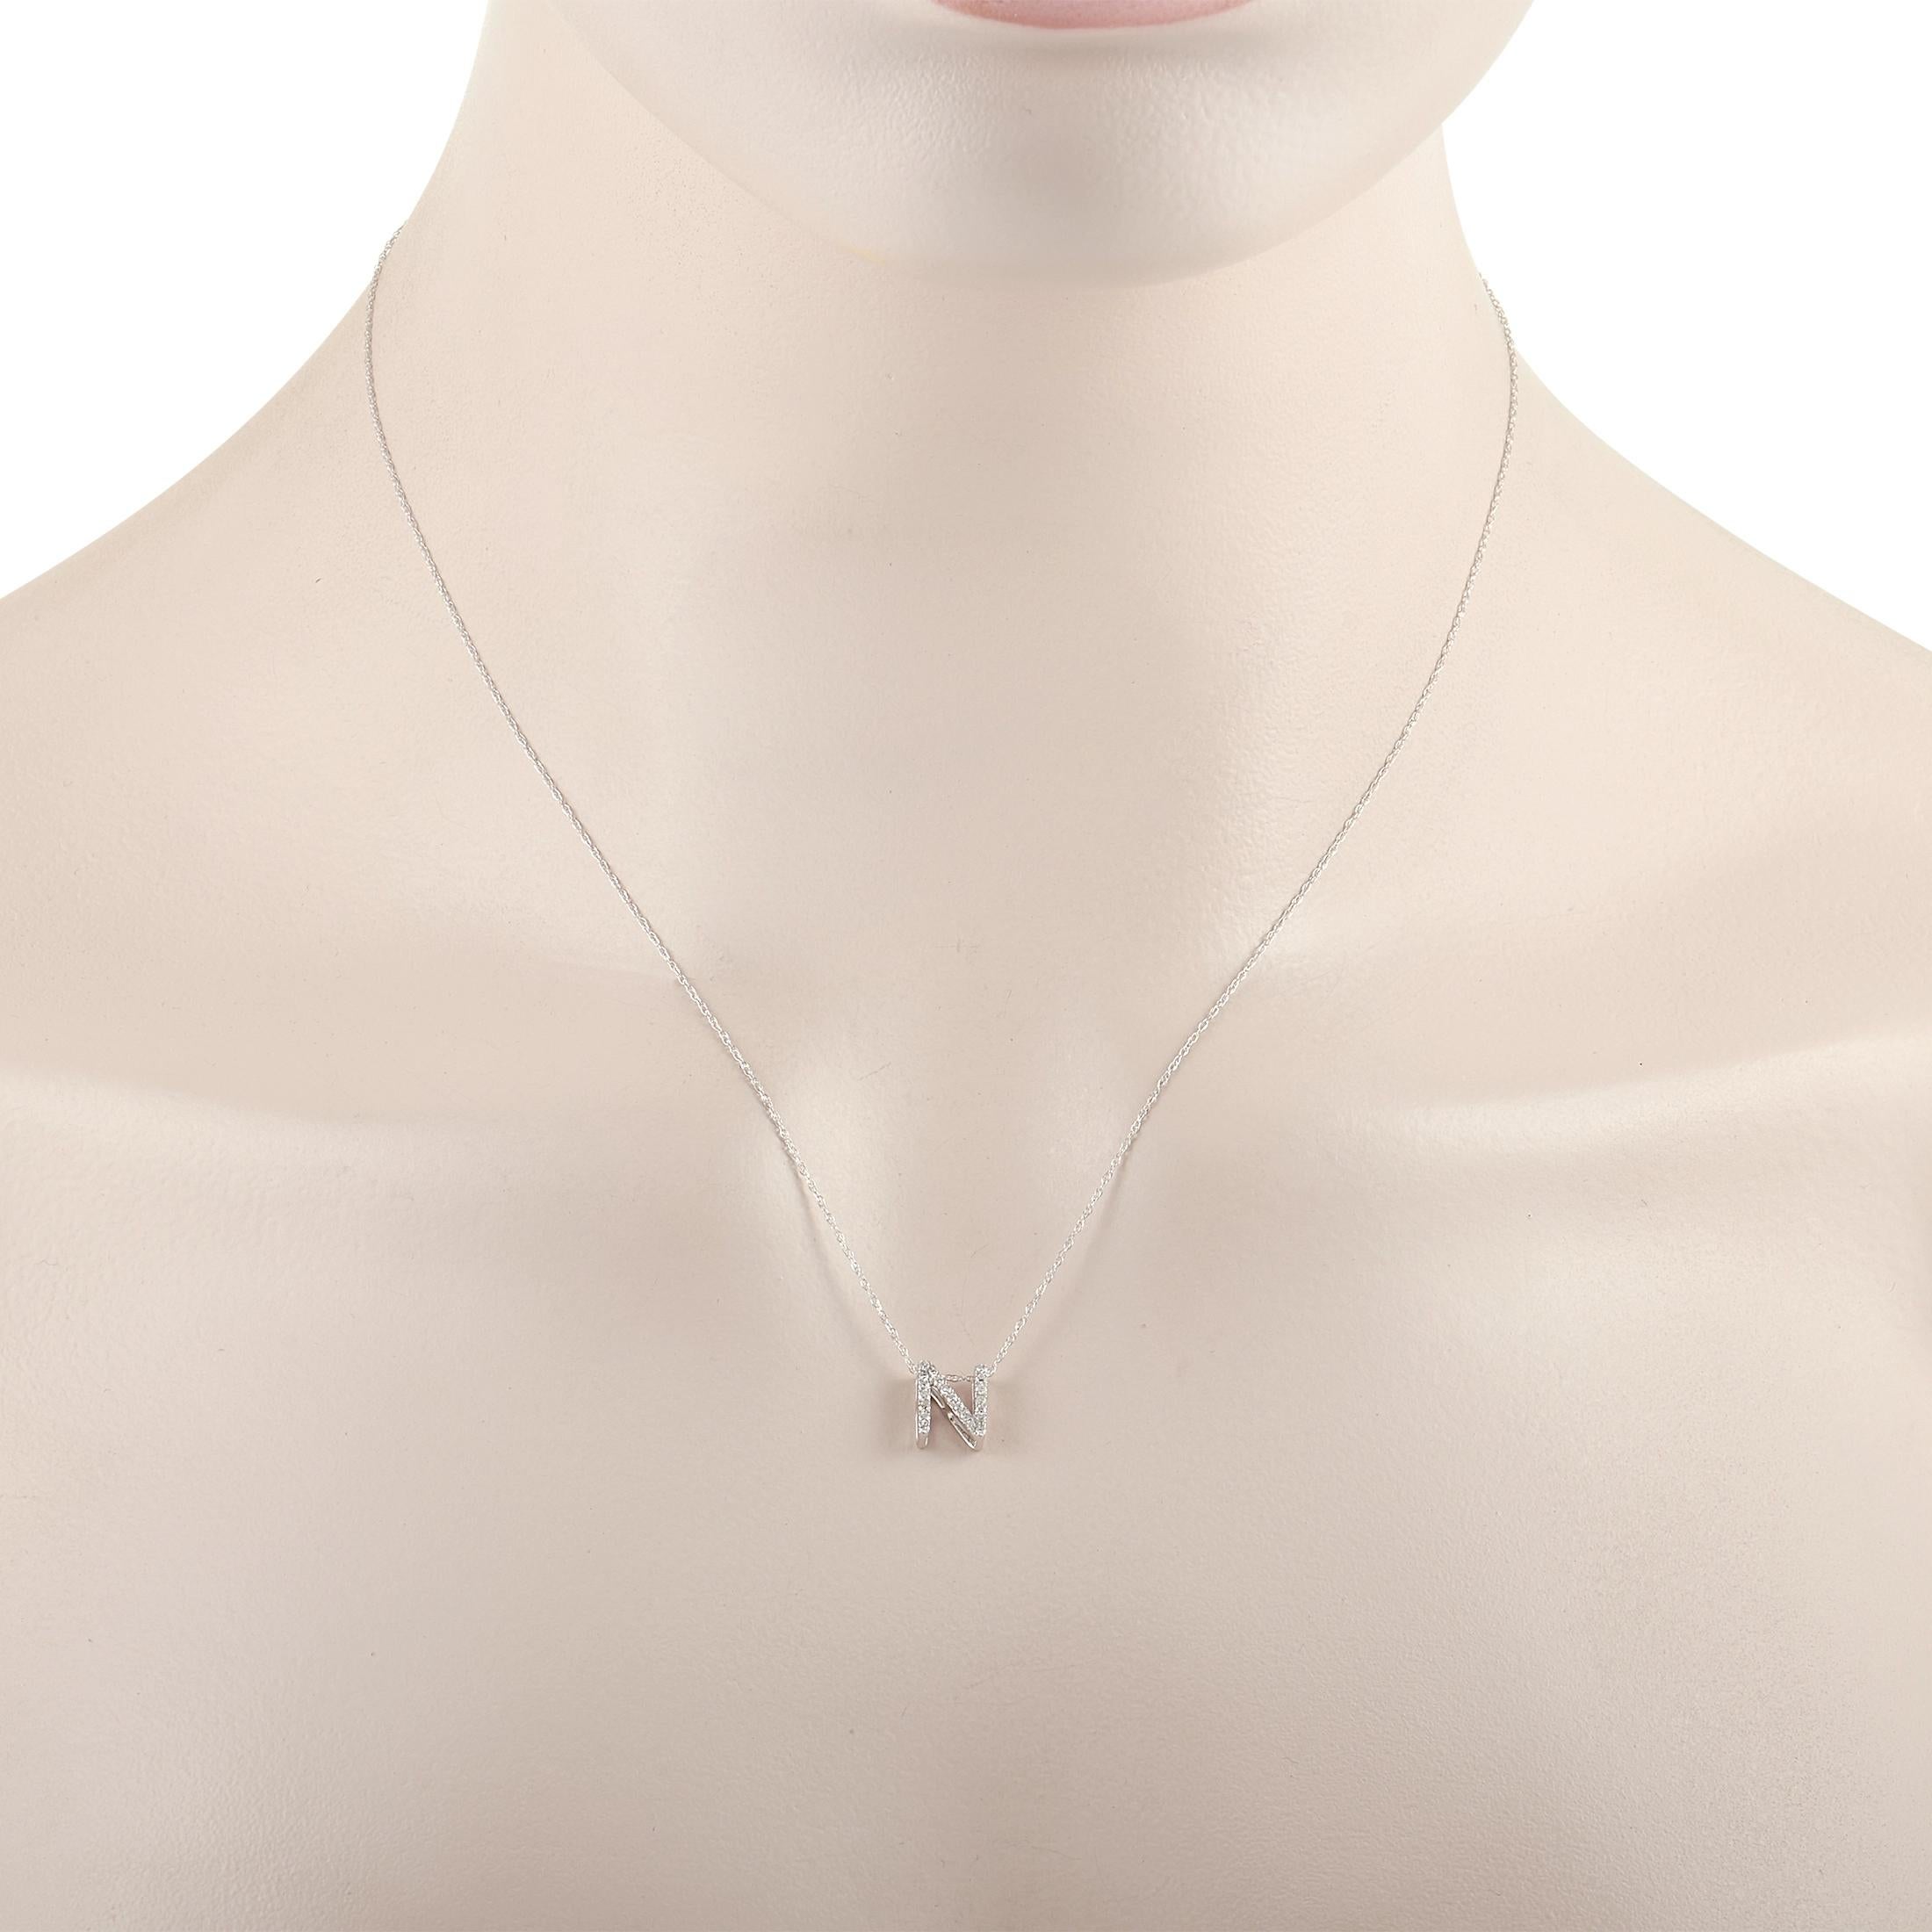 This pretty LB Exclusive 14K White Gold 0.10 ct Diamond Initial ‘N’ Necklace is made with a delicate 14K white gold chain and features a small white gold pendant shaped like the letter ‘N’ and set with 0.10 carats of round diamonds throughout. The